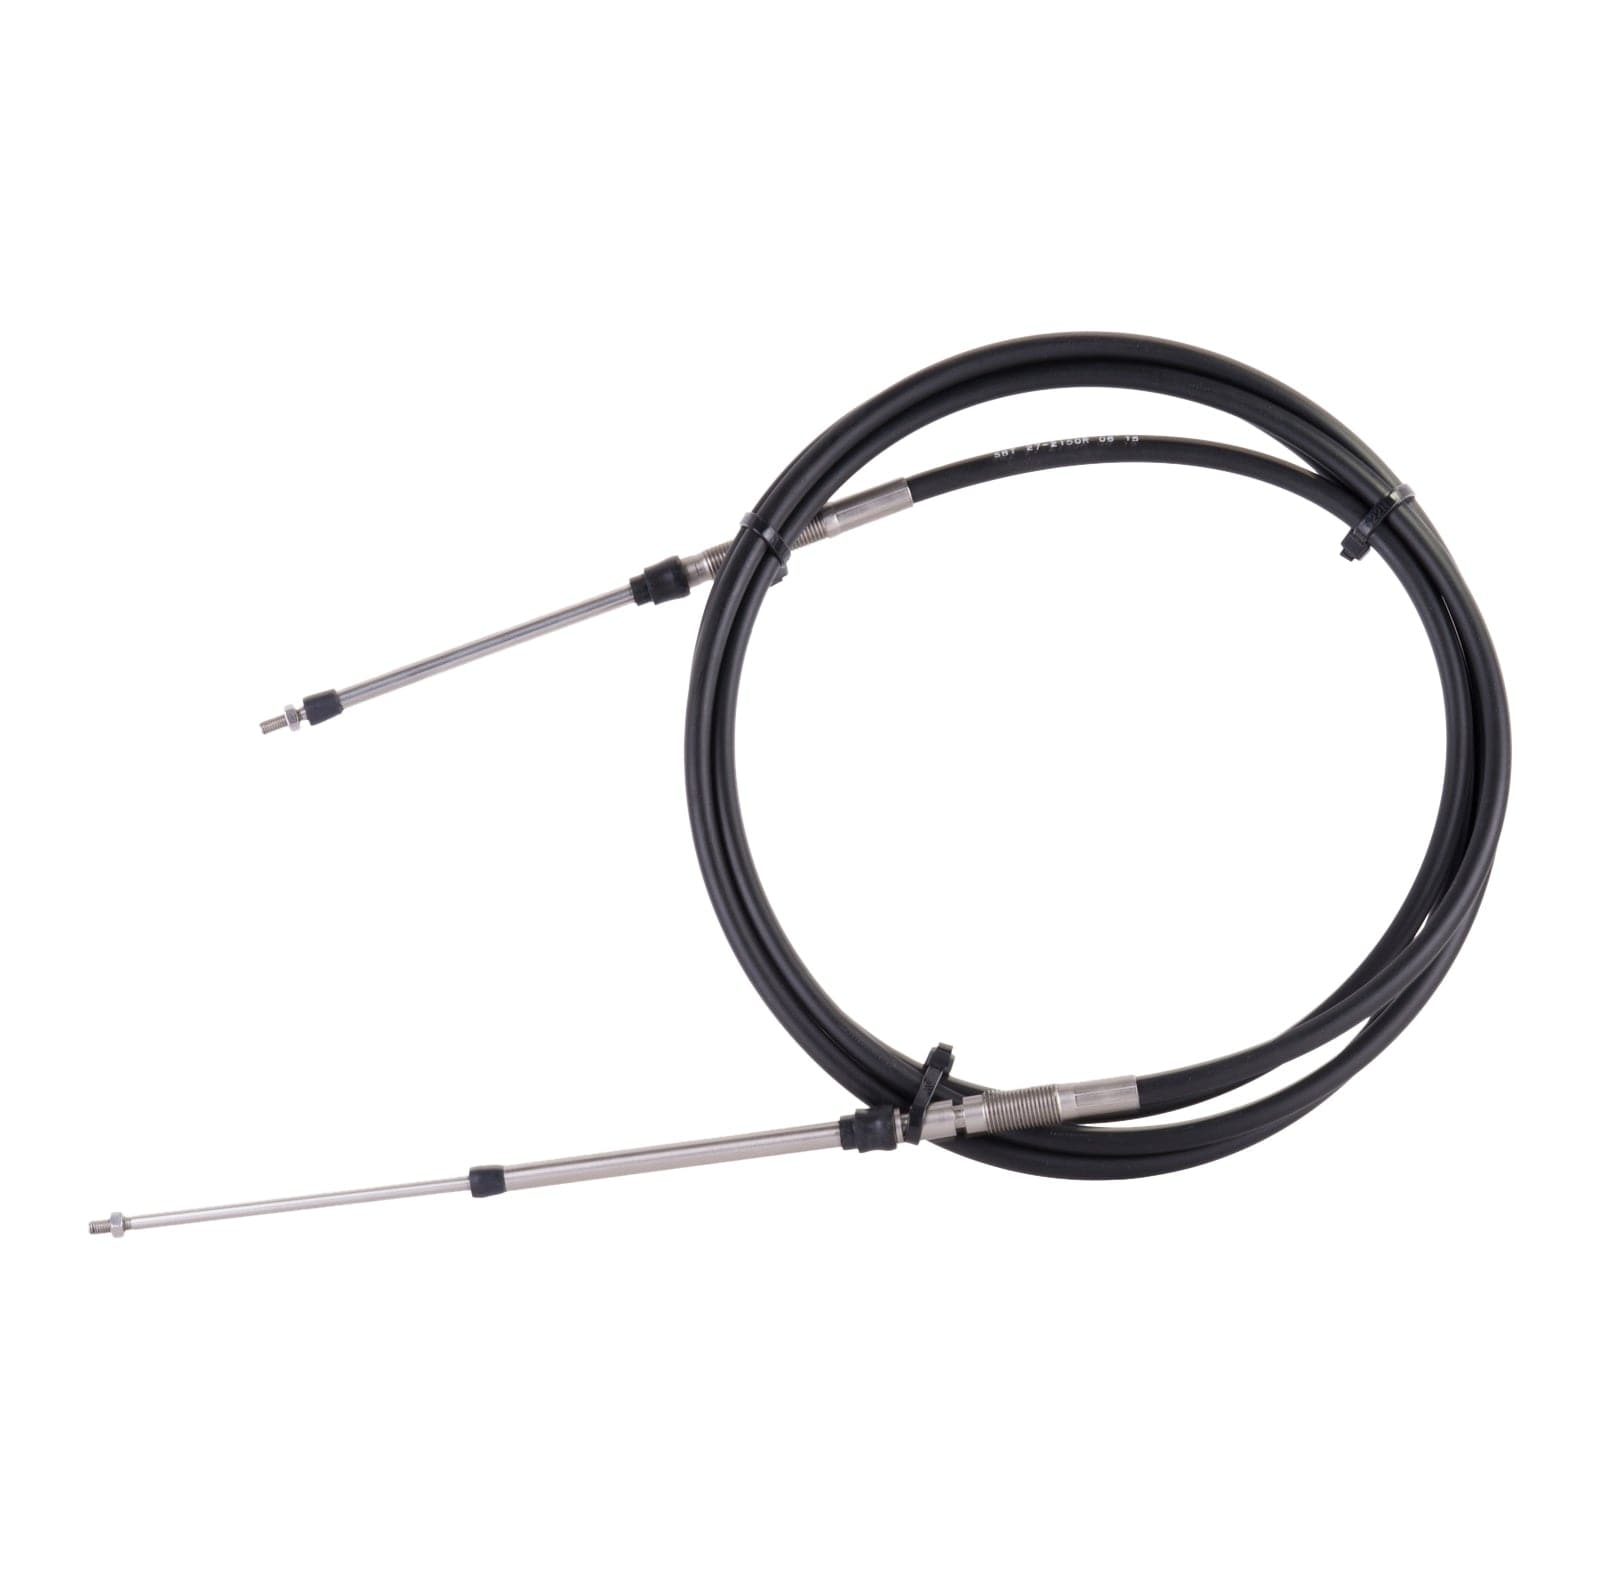 SBT Jet Boat Reverse / Shift Cable for Sea-Doo Sportster/Sportster LE/Sportster LE DI 204170044